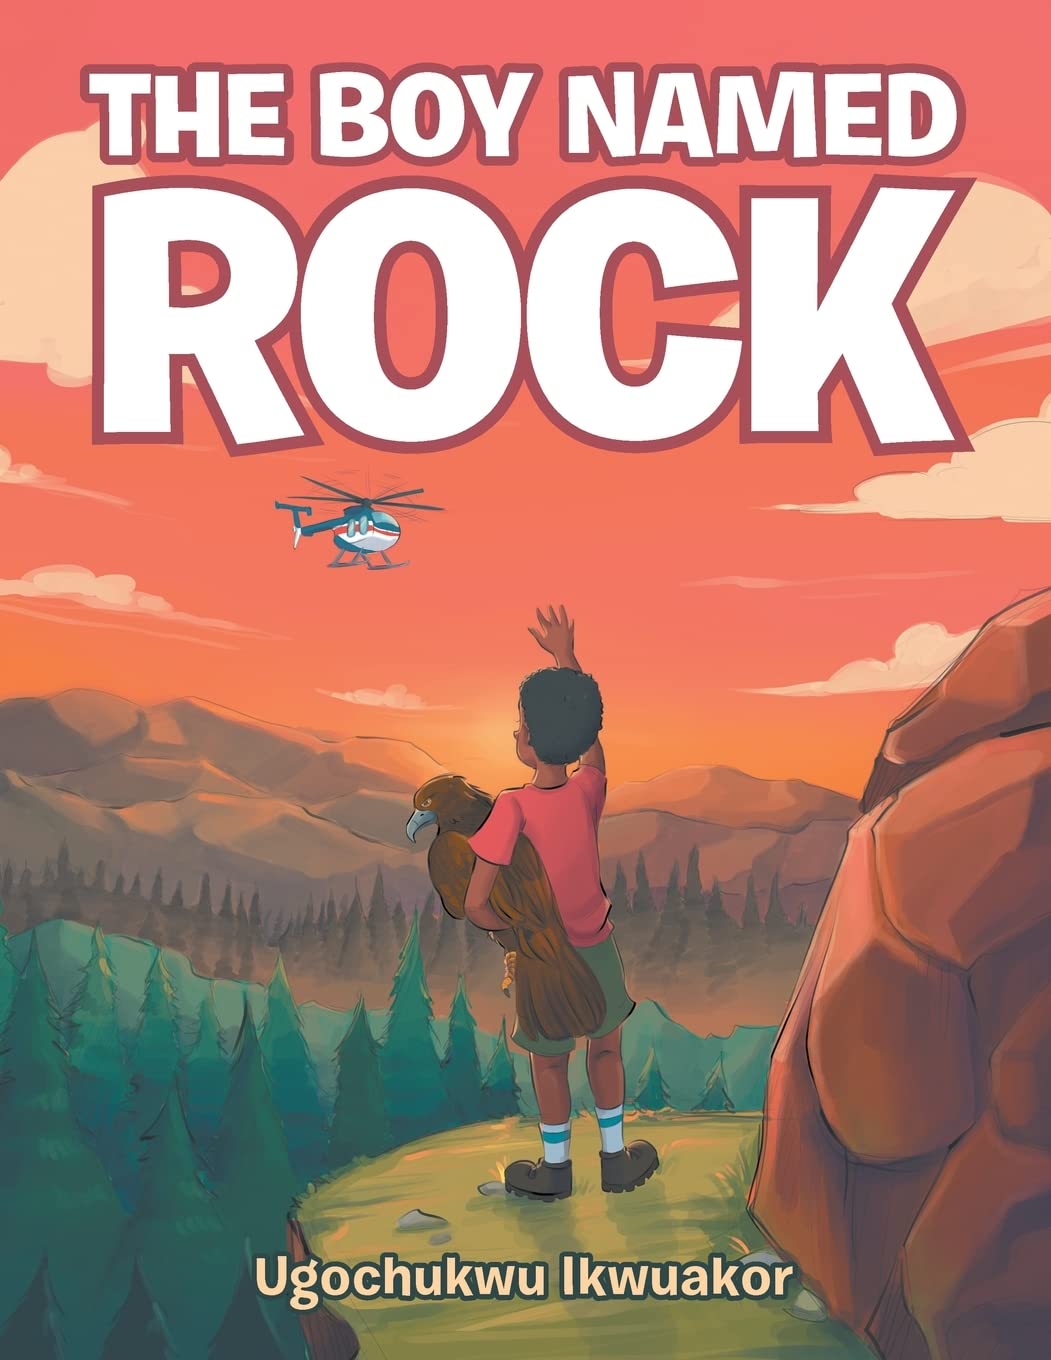 Ugochukwu Ikwuakor’s The Boy Named Rock Catches the Attention of Author’s Tranquility Press